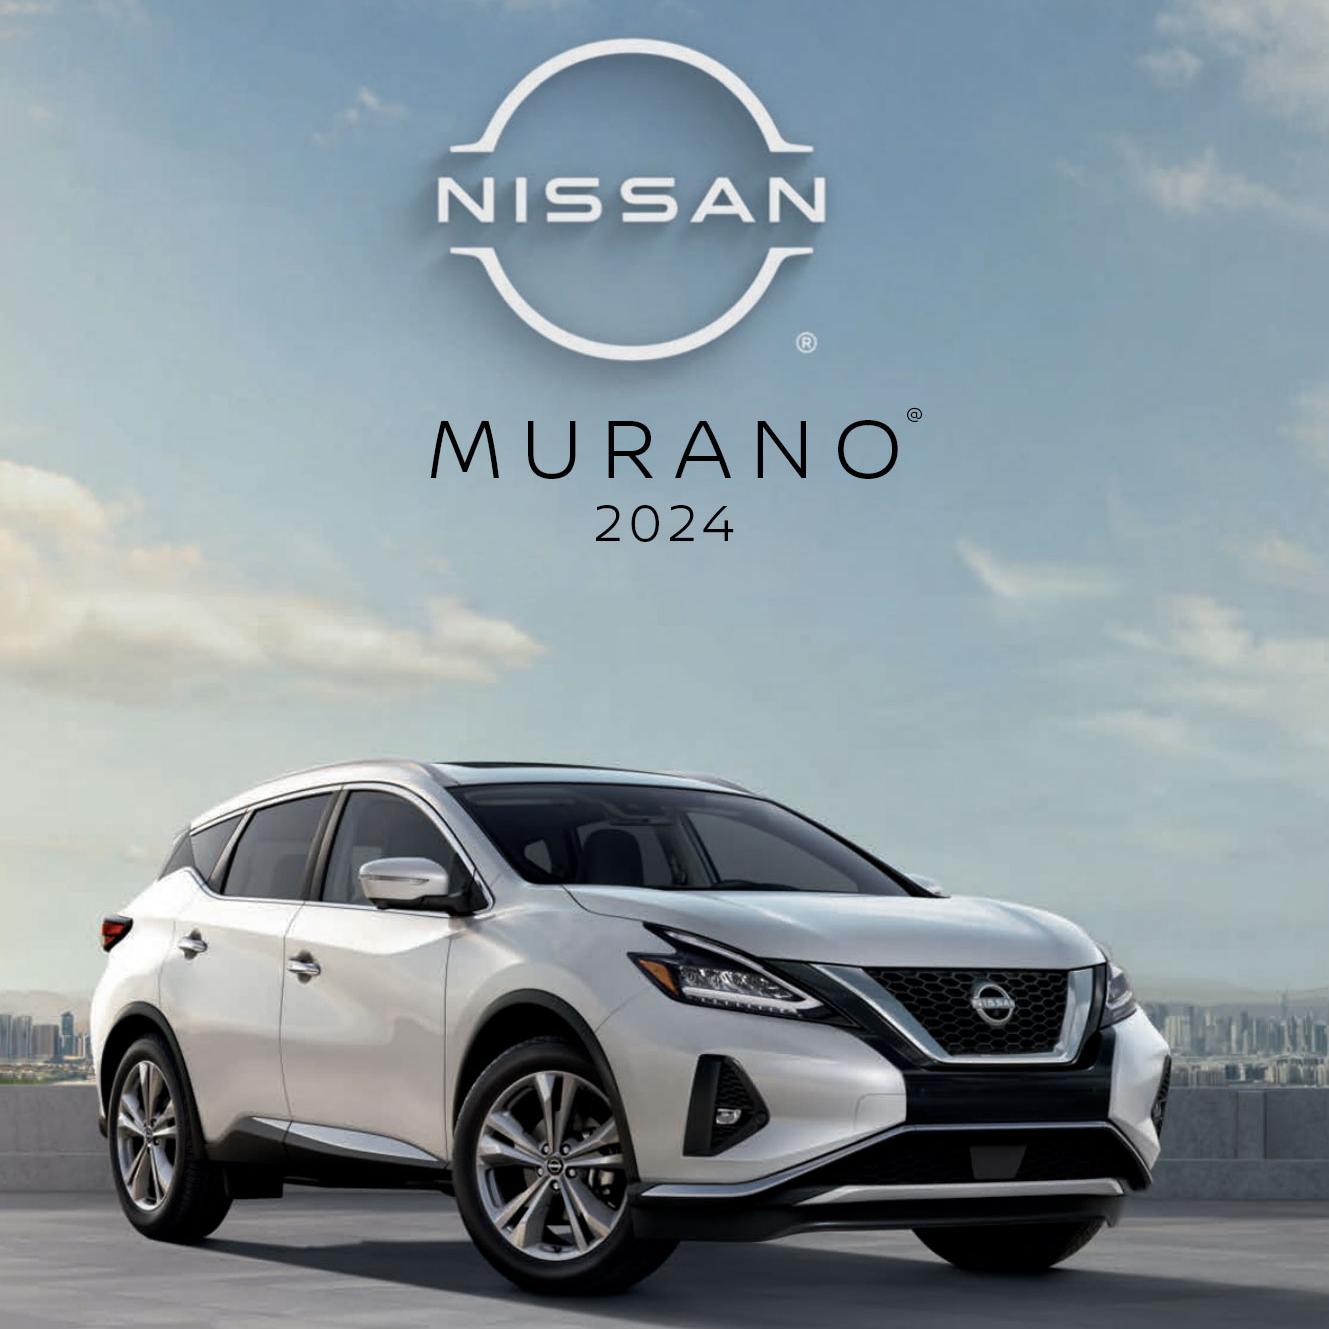 MURANO Bring everyone together in our most thrilling SUV